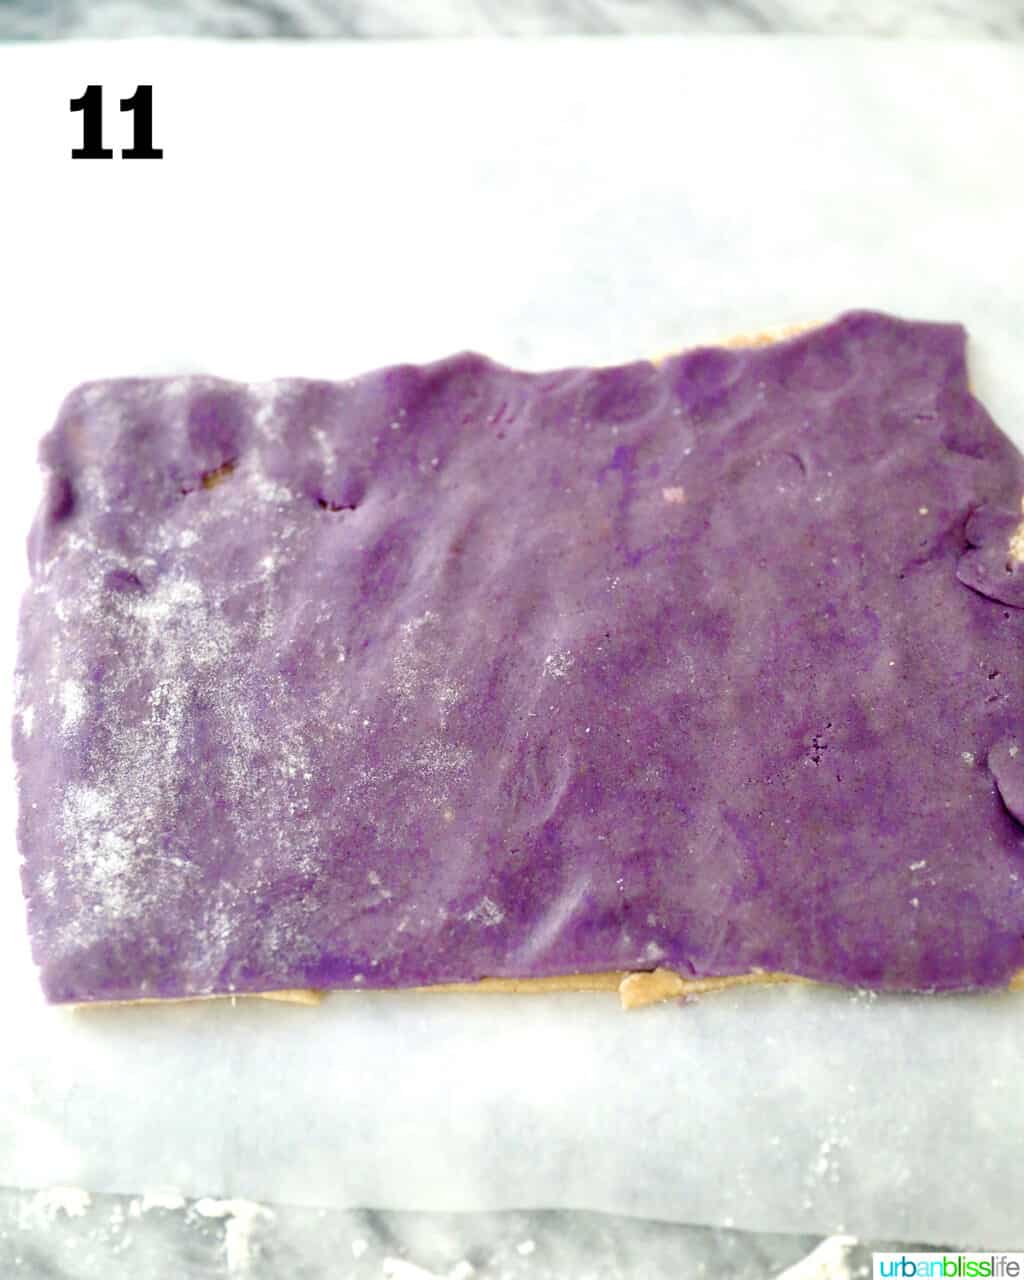 purple dough rolled out flat over cookie dough